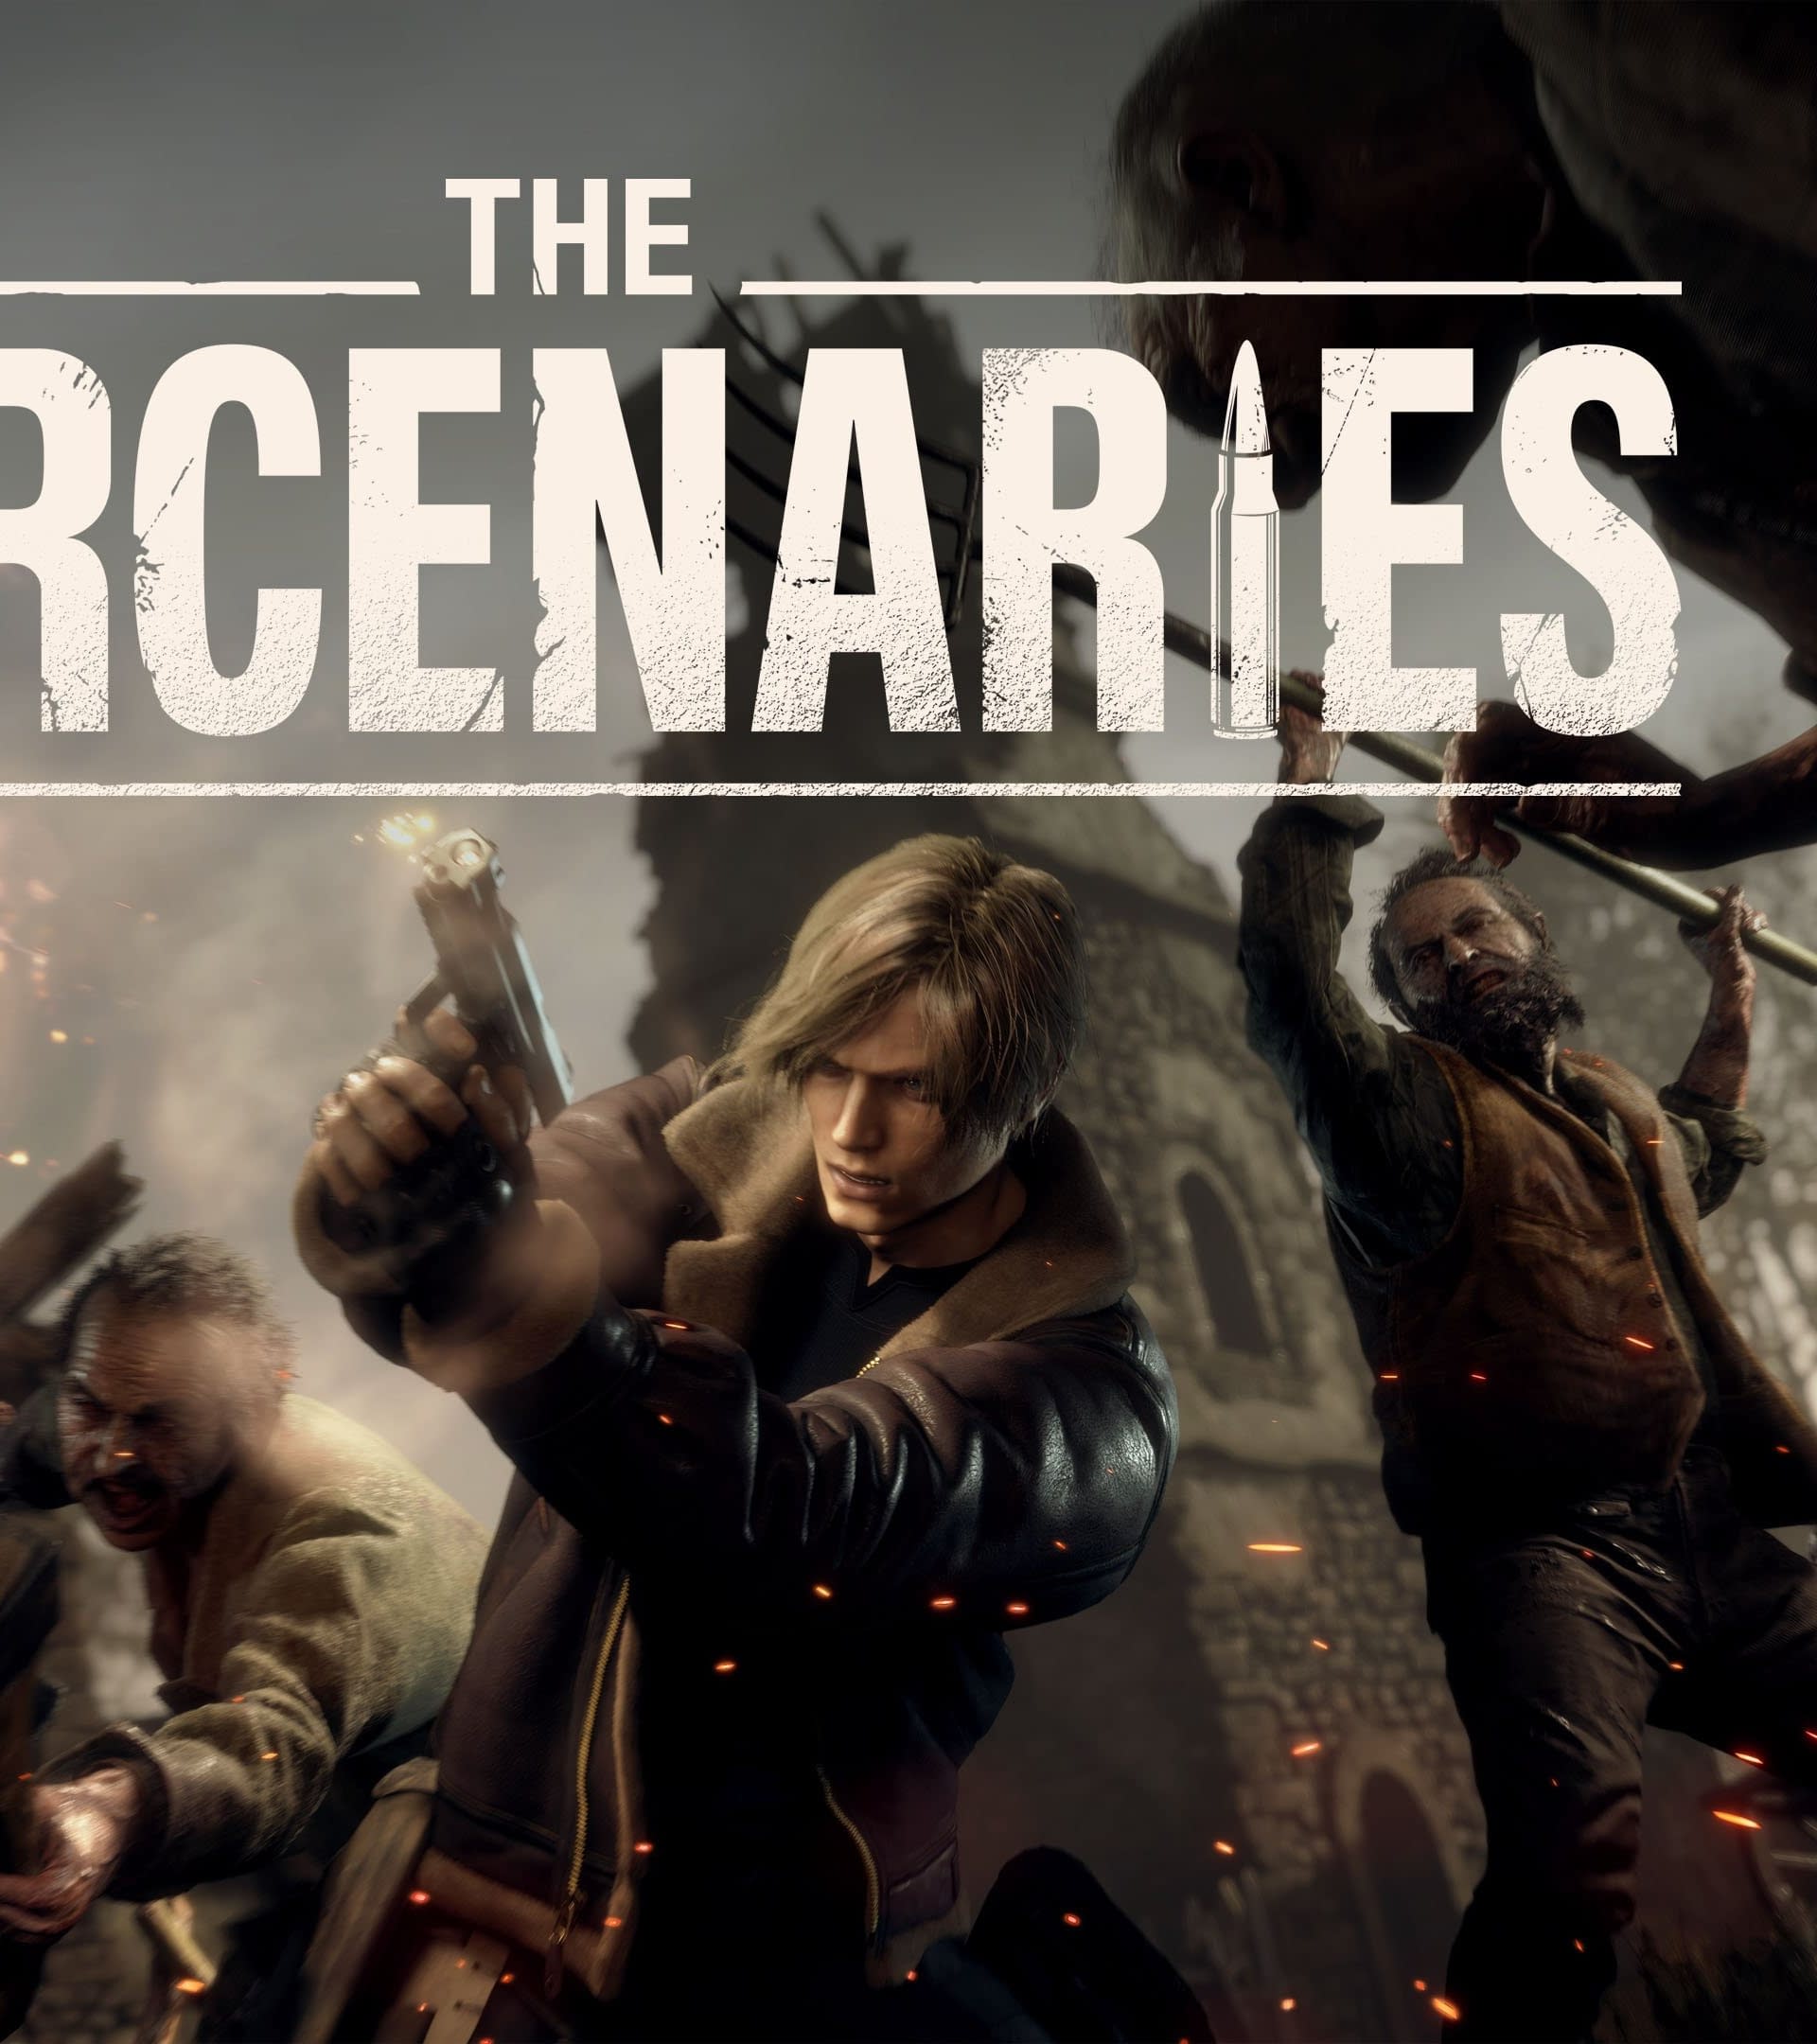 Resident Evil 4 Remake free Dlc The Mercenaries comes from 7 April